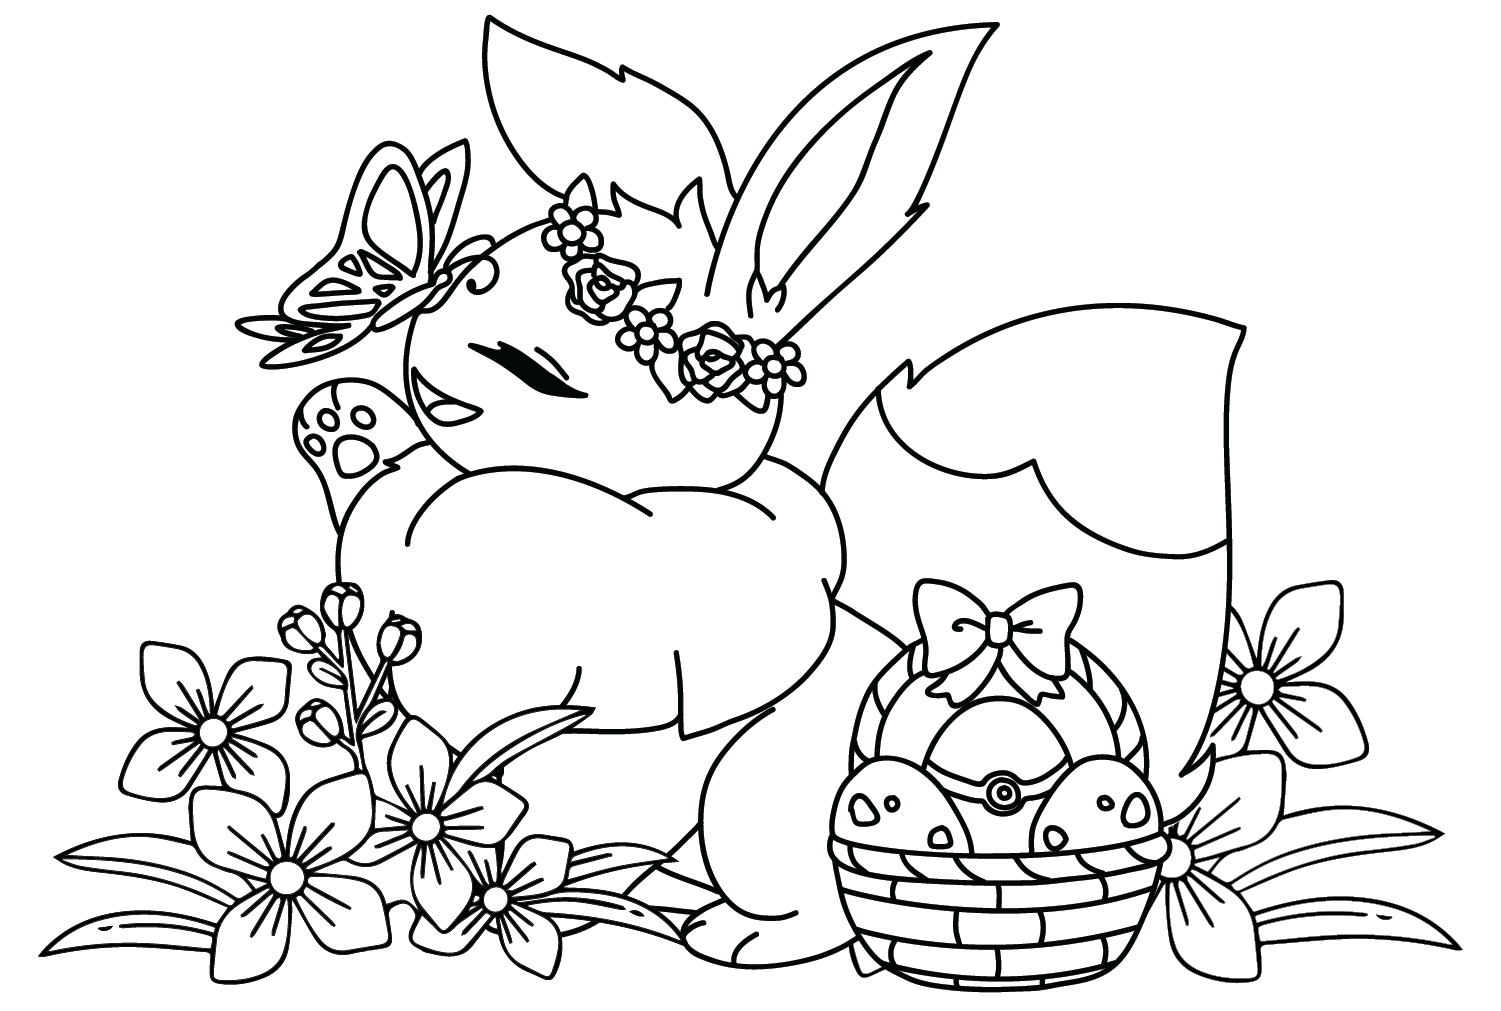 Eevee Pokemon Coloring Pages to for Kids from Eevee